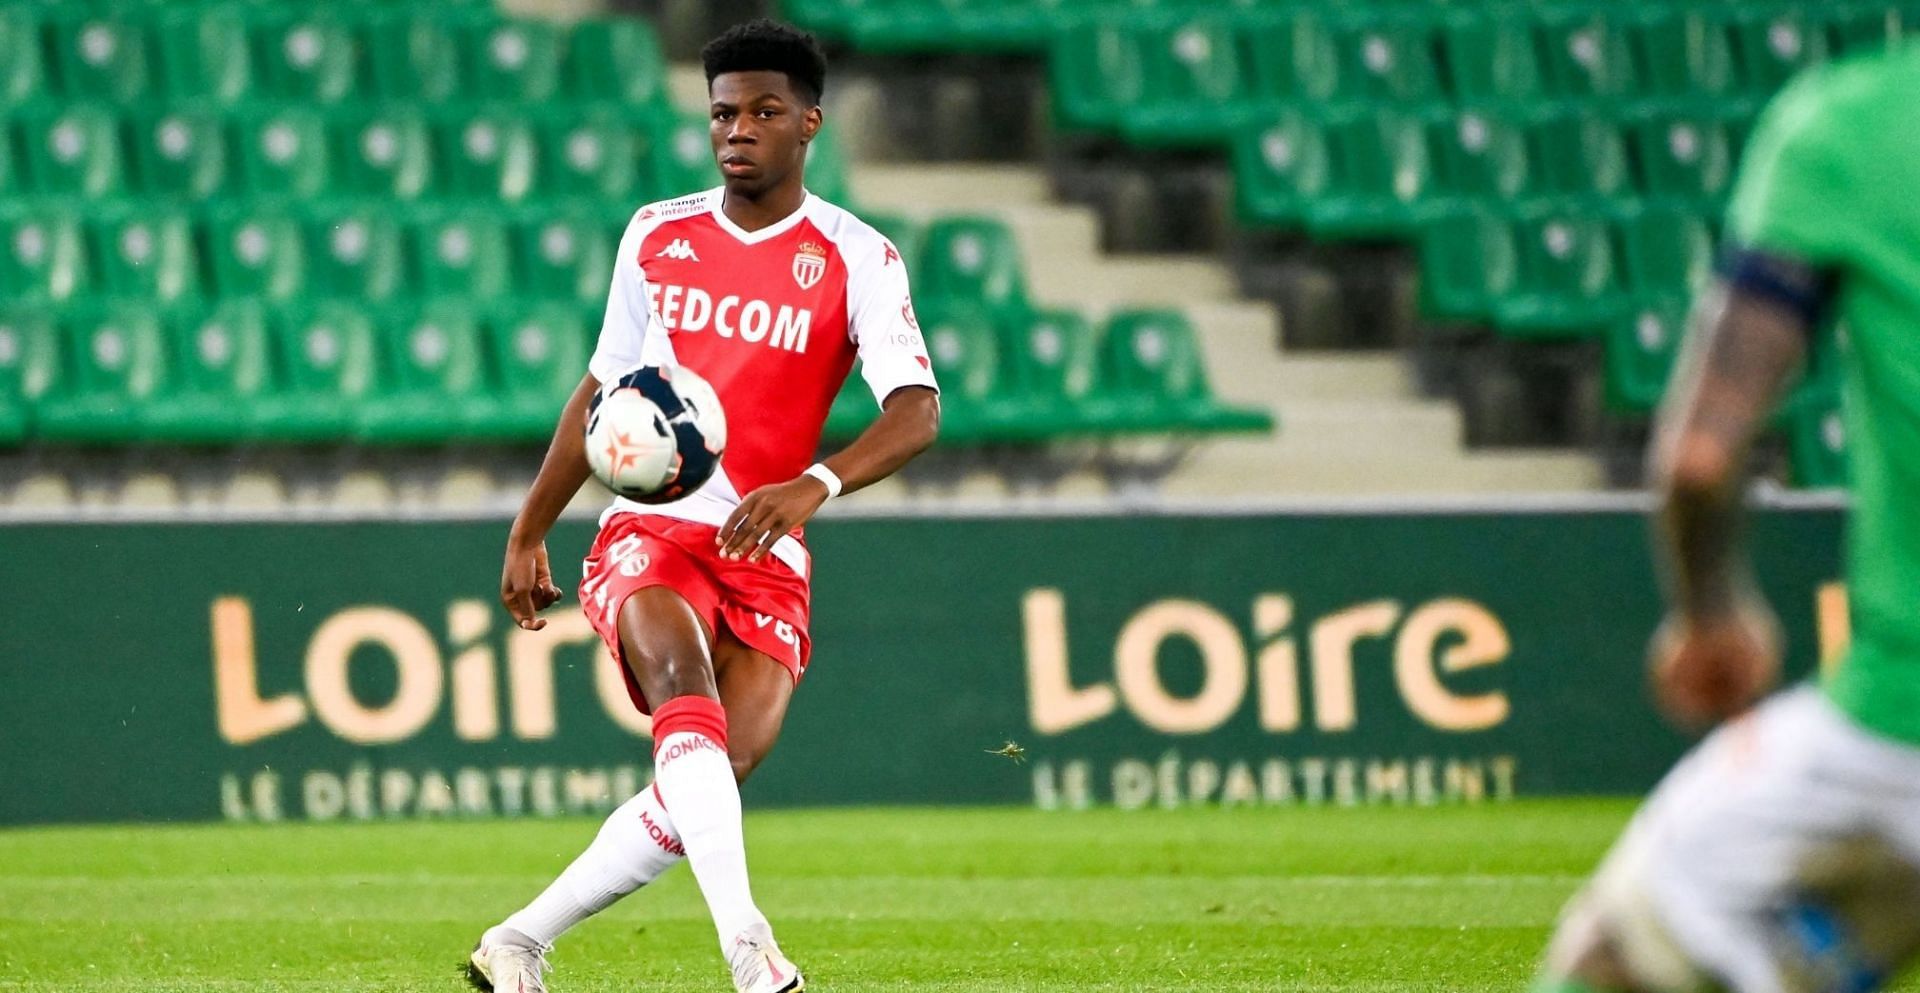 Monaco face Clermont Foot in the upcoming Ligue 1 fixture on Sunday